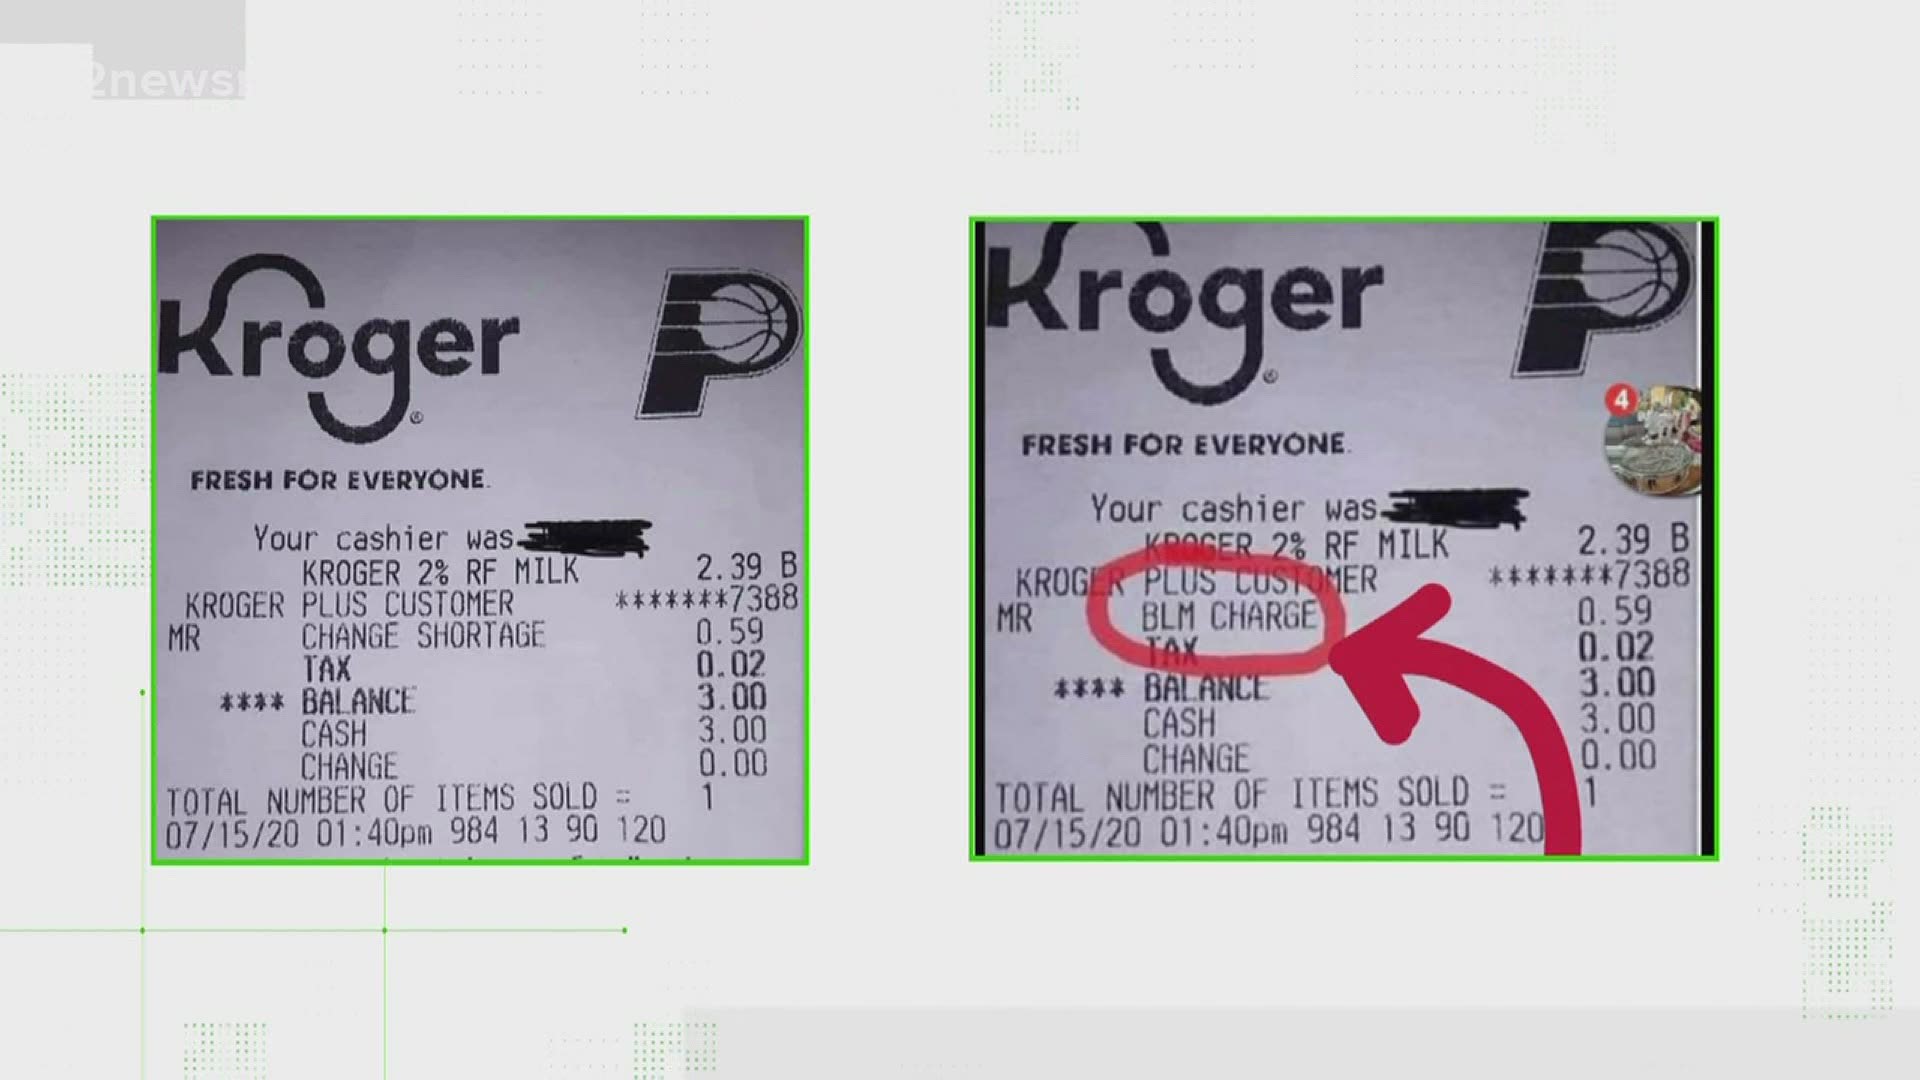 Kroger says the receipt seen on social media is photo shopped